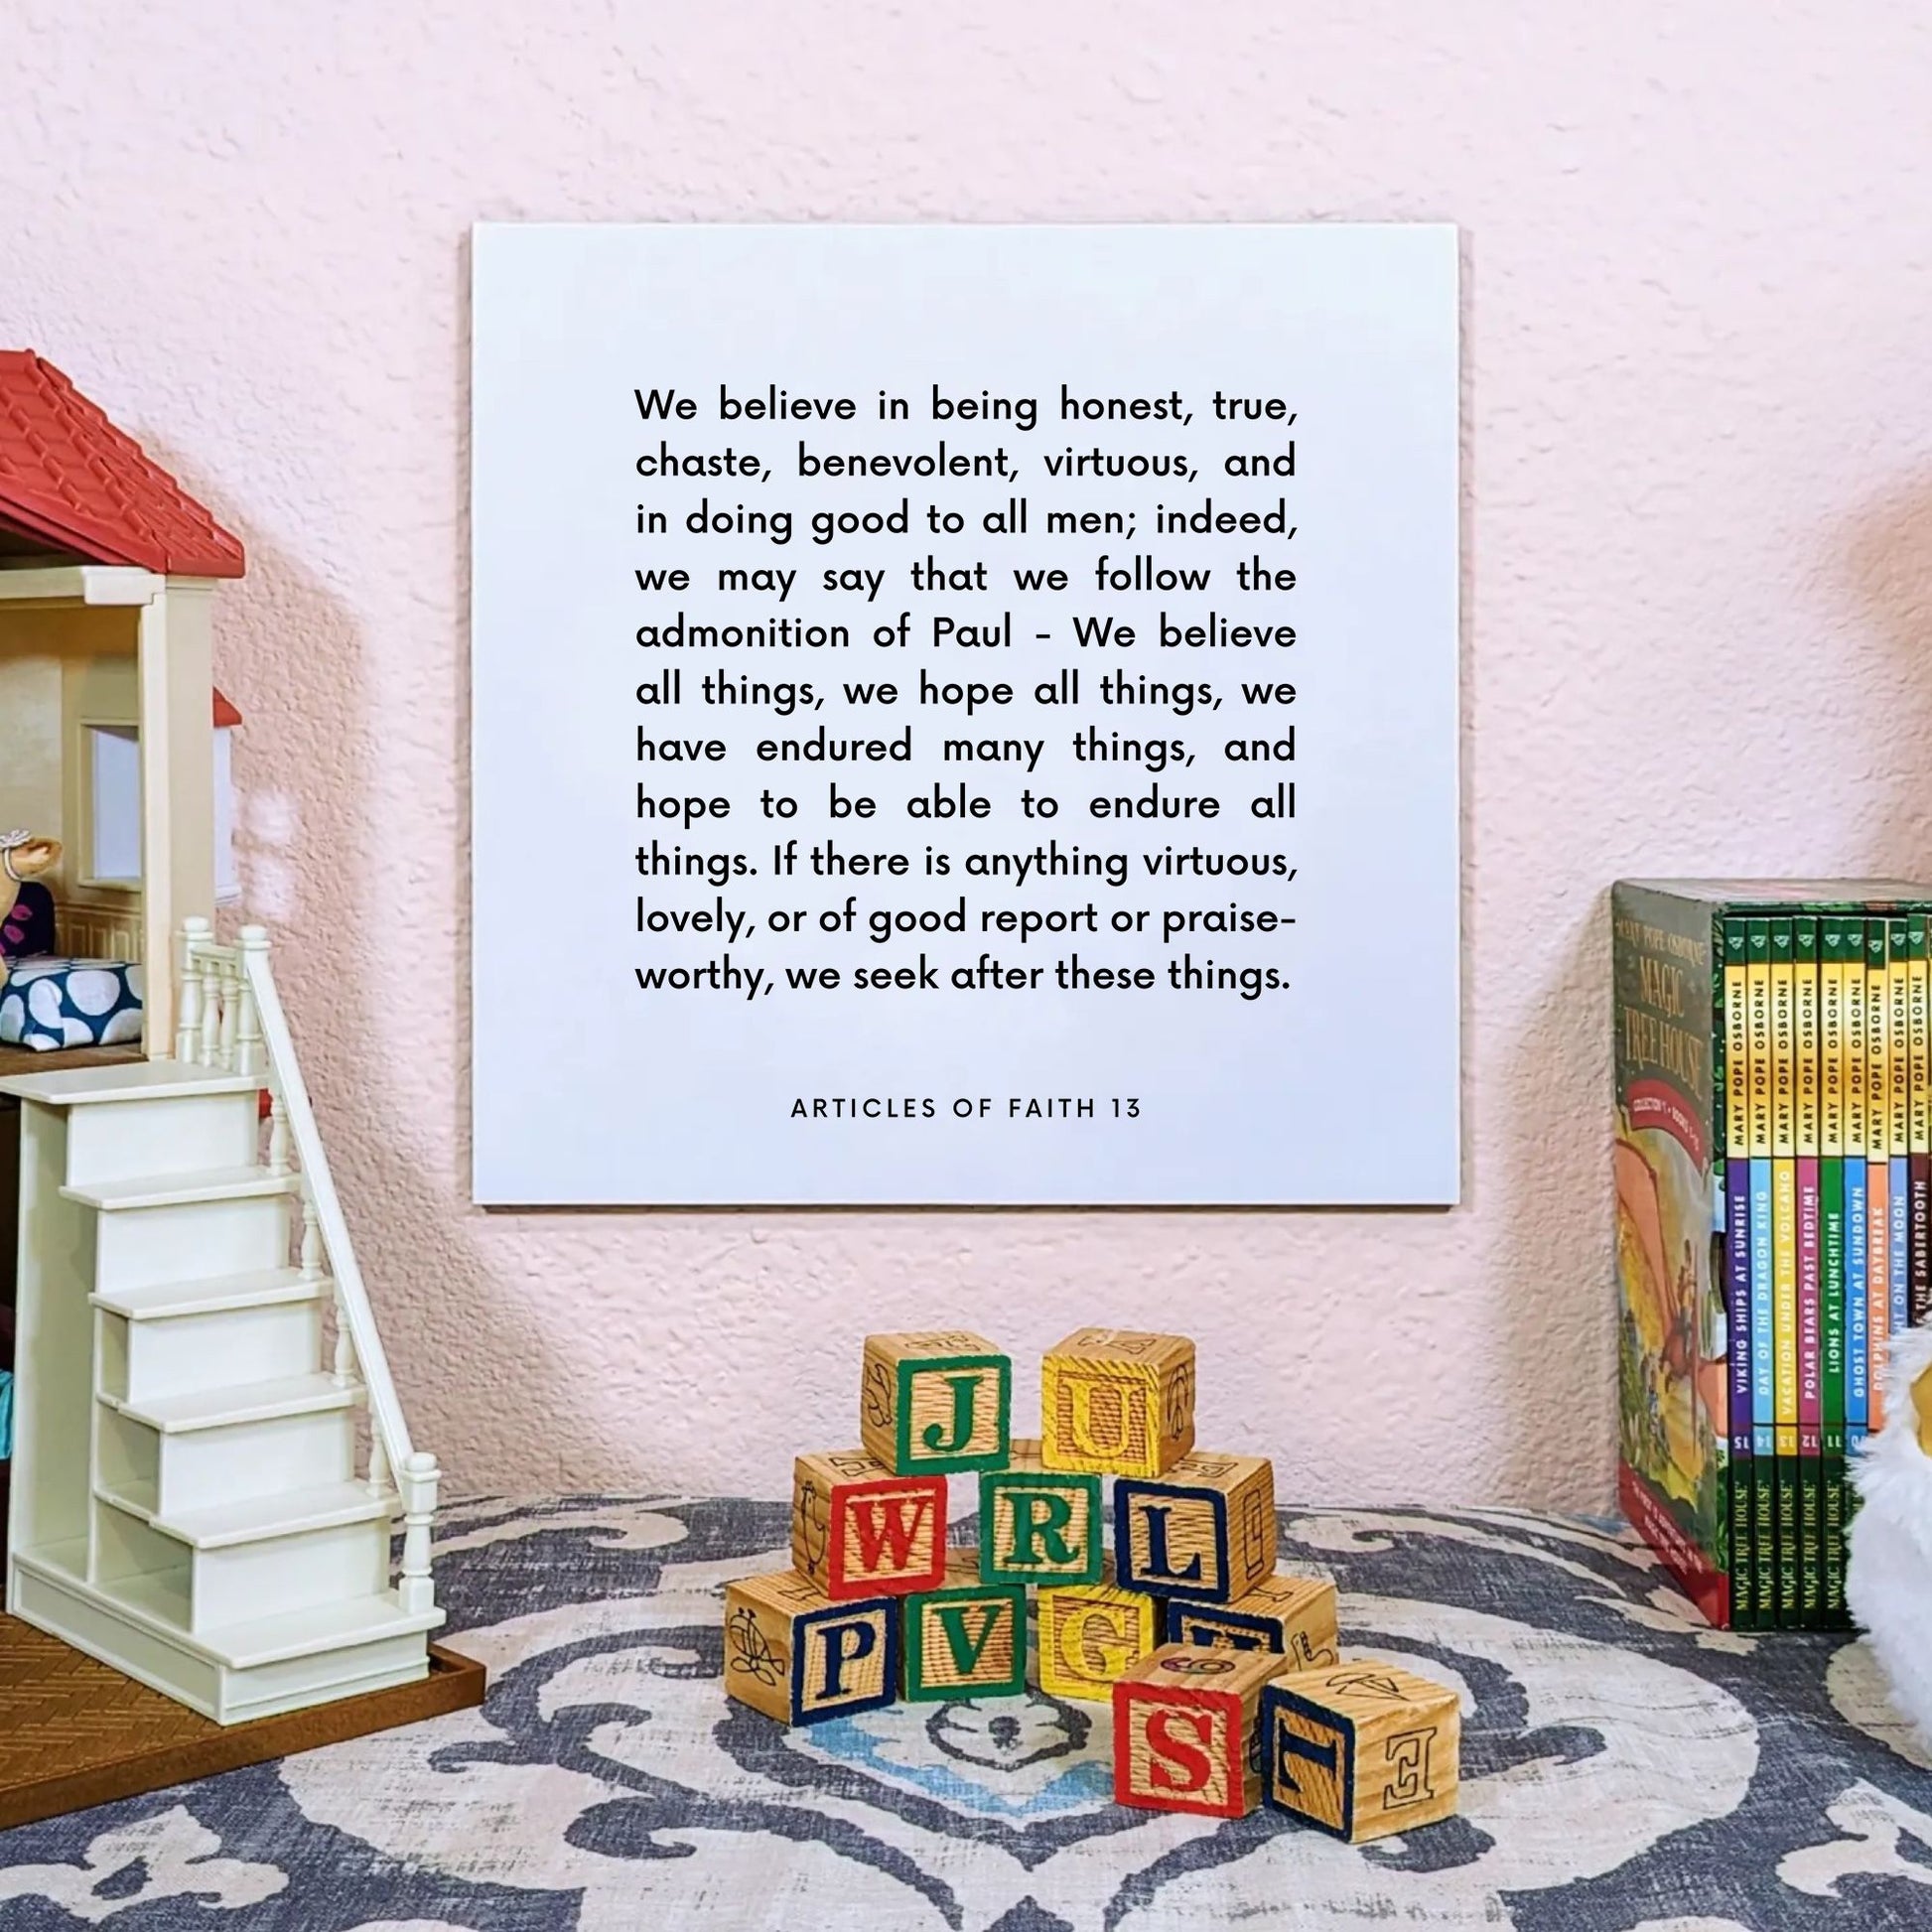 Playroom mouting of the scripture tile for Articles of Faith 13 - "We believe in being honest, true, chaste, benevolent"